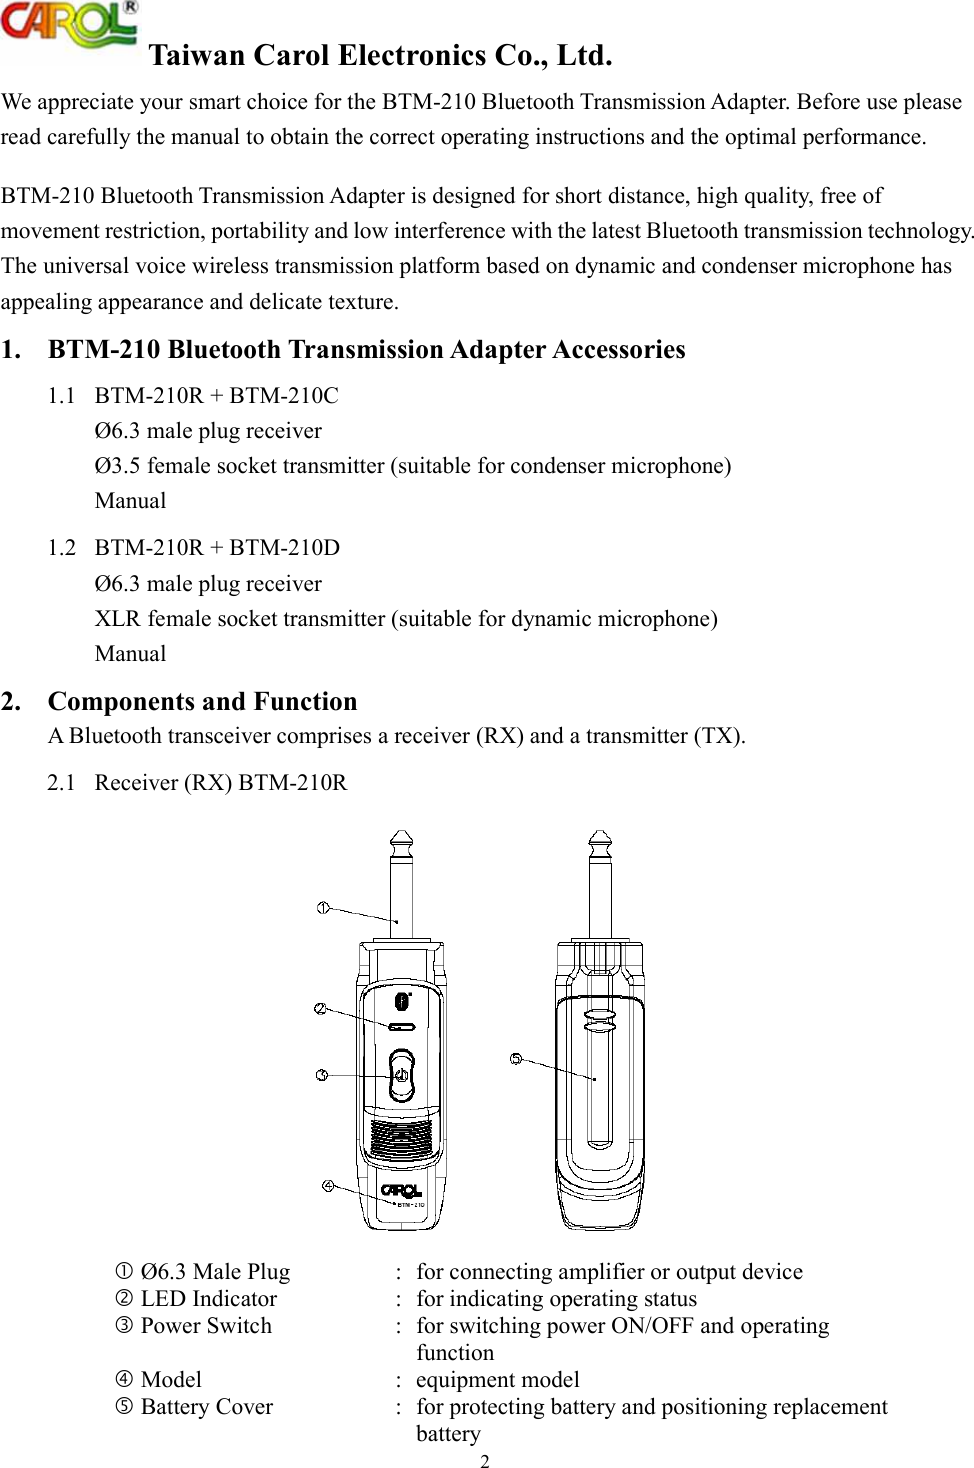  Taiwan Carol Electronics Co., Ltd. 2 We appreciate your smart choice for the BTM-210 Bluetooth Transmission Adapter. Before use please read carefully the manual to obtain the correct operating instructions and the optimal performance.  BTM-210 Bluetooth Transmission Adapter is designed for short distance, high quality, free of movement restriction, portability and low interference with the latest Bluetooth transmission technology. The universal voice wireless transmission platform based on dynamic and condenser microphone has appealing appearance and delicate texture. 1. BTM-210 Bluetooth Transmission Adapter Accessories 1.1  BTM-210R + BTM-210C Ø6.3 male plug receiver Ø3.5 female socket transmitter (suitable for condenser microphone) Manual 1.2  BTM-210R + BTM-210D Ø6.3 male plug receiver  XLR female socket transmitter (suitable for dynamic microphone) Manual 2.  Components and Function A Bluetooth transceiver comprises a receiver (RX) and a transmitter (TX). 2.1  Receiver (RX) BTM-210R   Ø6.3 Male Plug  : for connecting amplifier or output device   LED Indicator  : for indicating operating status  Power Switch  :  for switching power ON/OFF and operating function  Model  :  equipment model  Battery Cover  :  for protecting battery and positioning replacement battery 